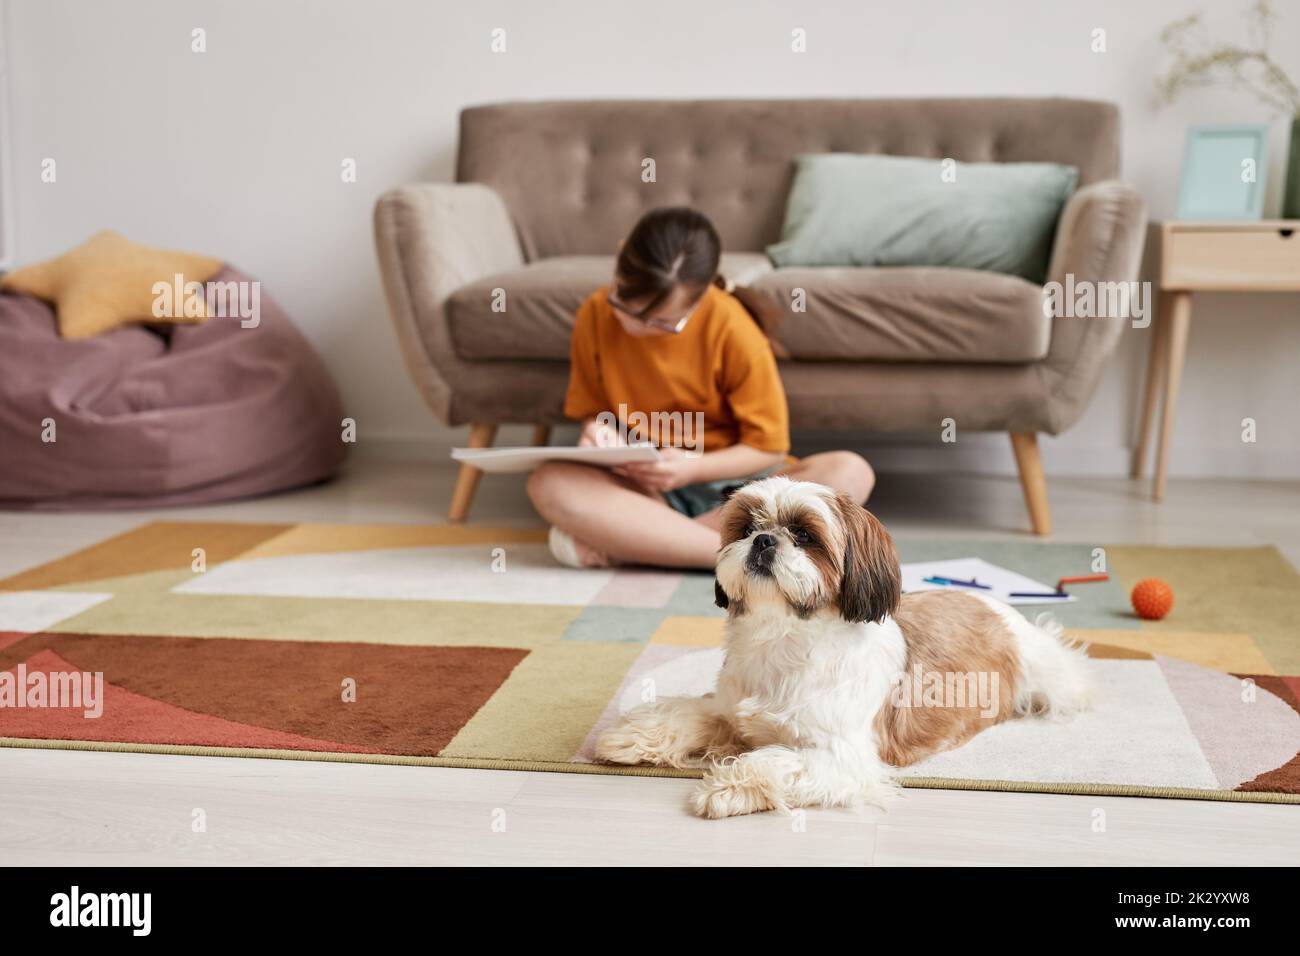 Portrait of cute small dog lying on carpet at home with teenage girl in background, copy space Stock Photo